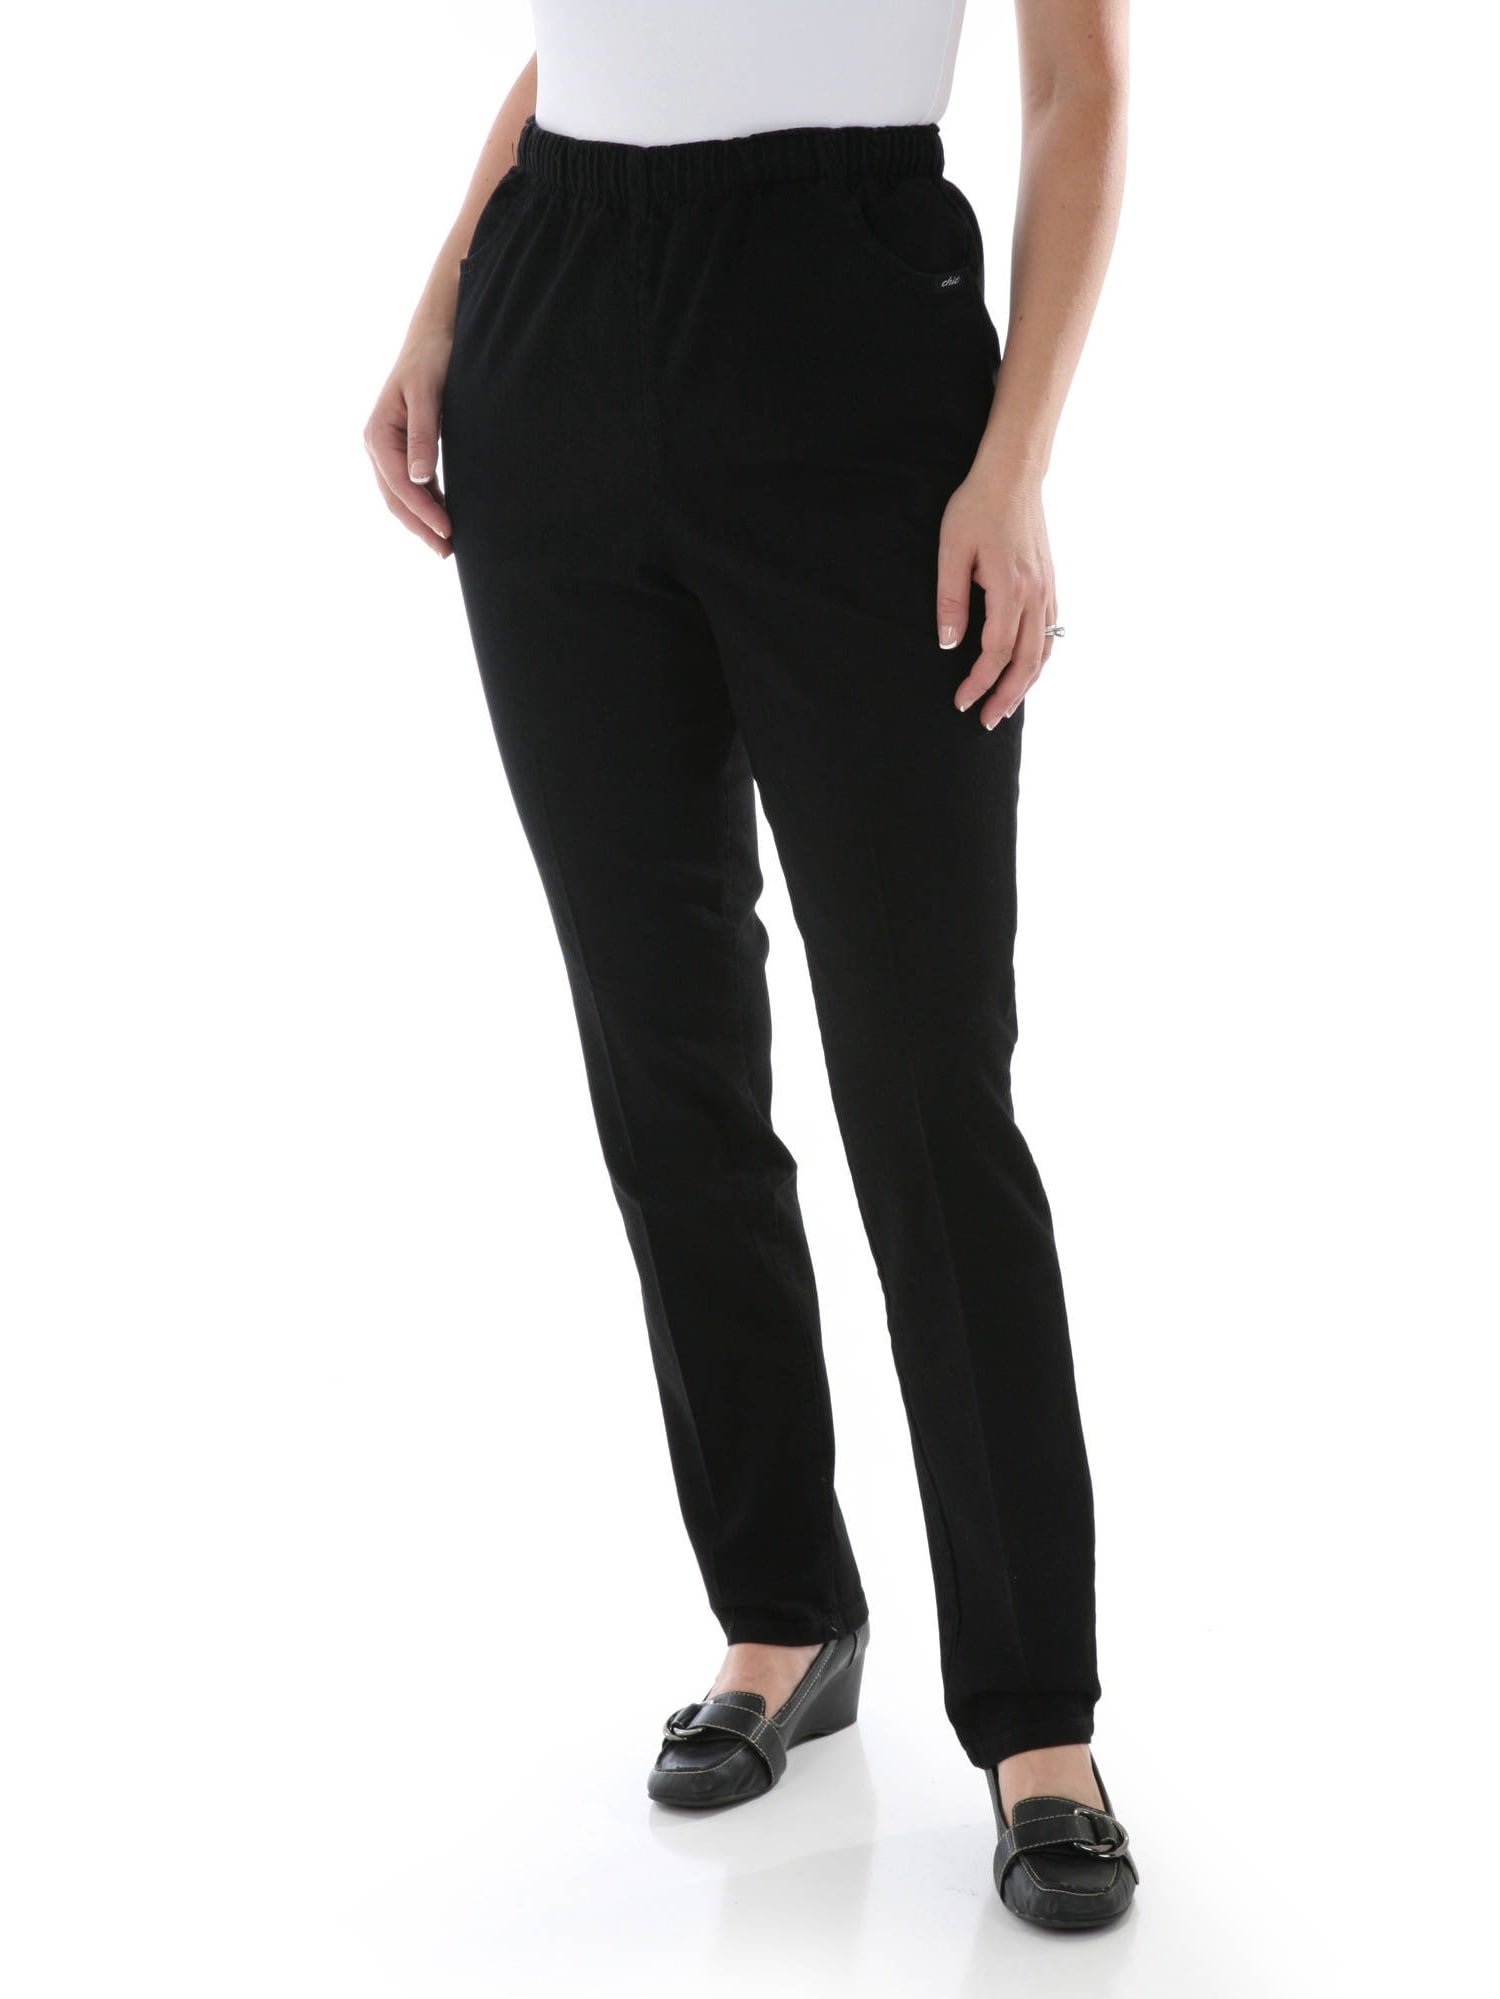 Buy Chic Womens Stretch Twill Pull On Pant at Ubuy New Zealand